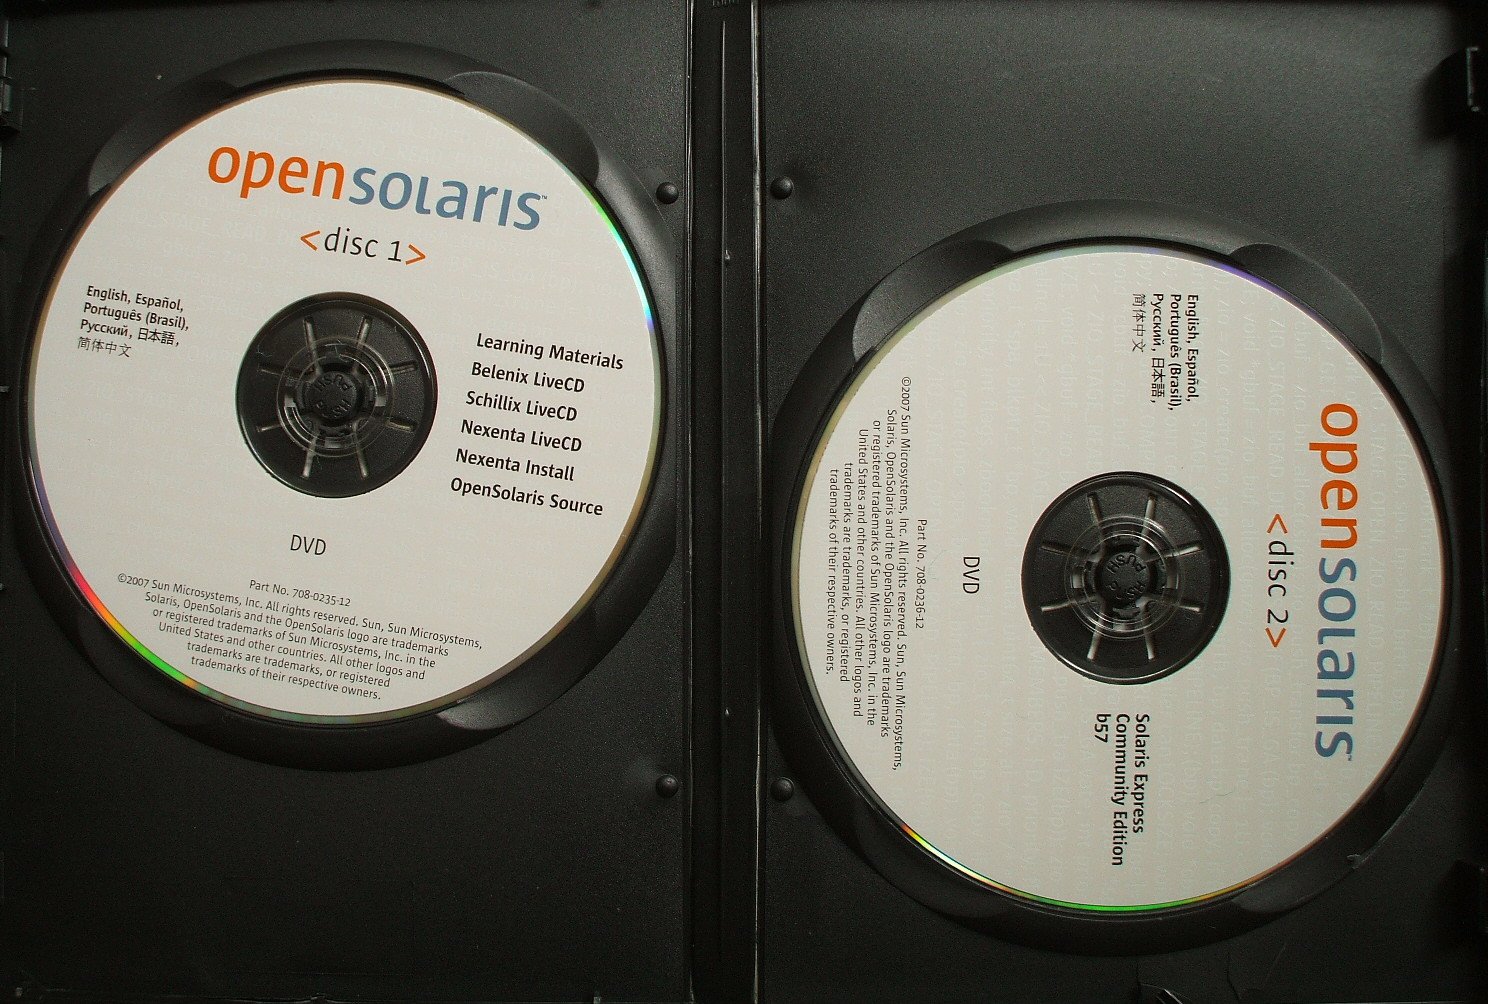 two dvd cases, one of which contains an open sign and the other has an open sign